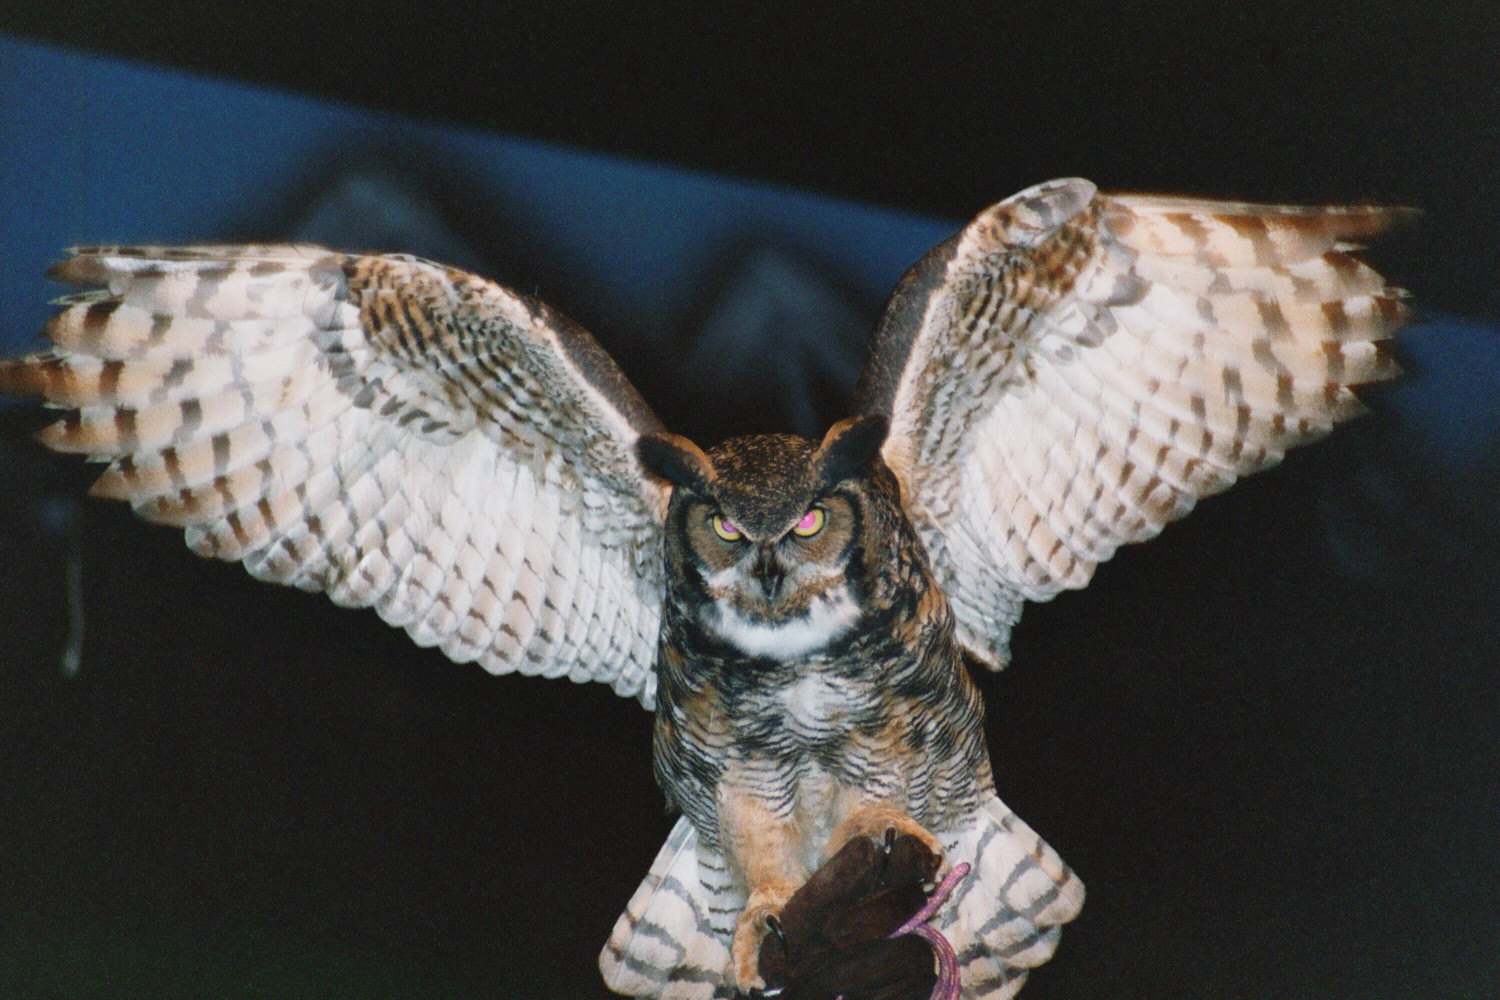 Photograph of a great horned owl, sitting on a falconer's glove